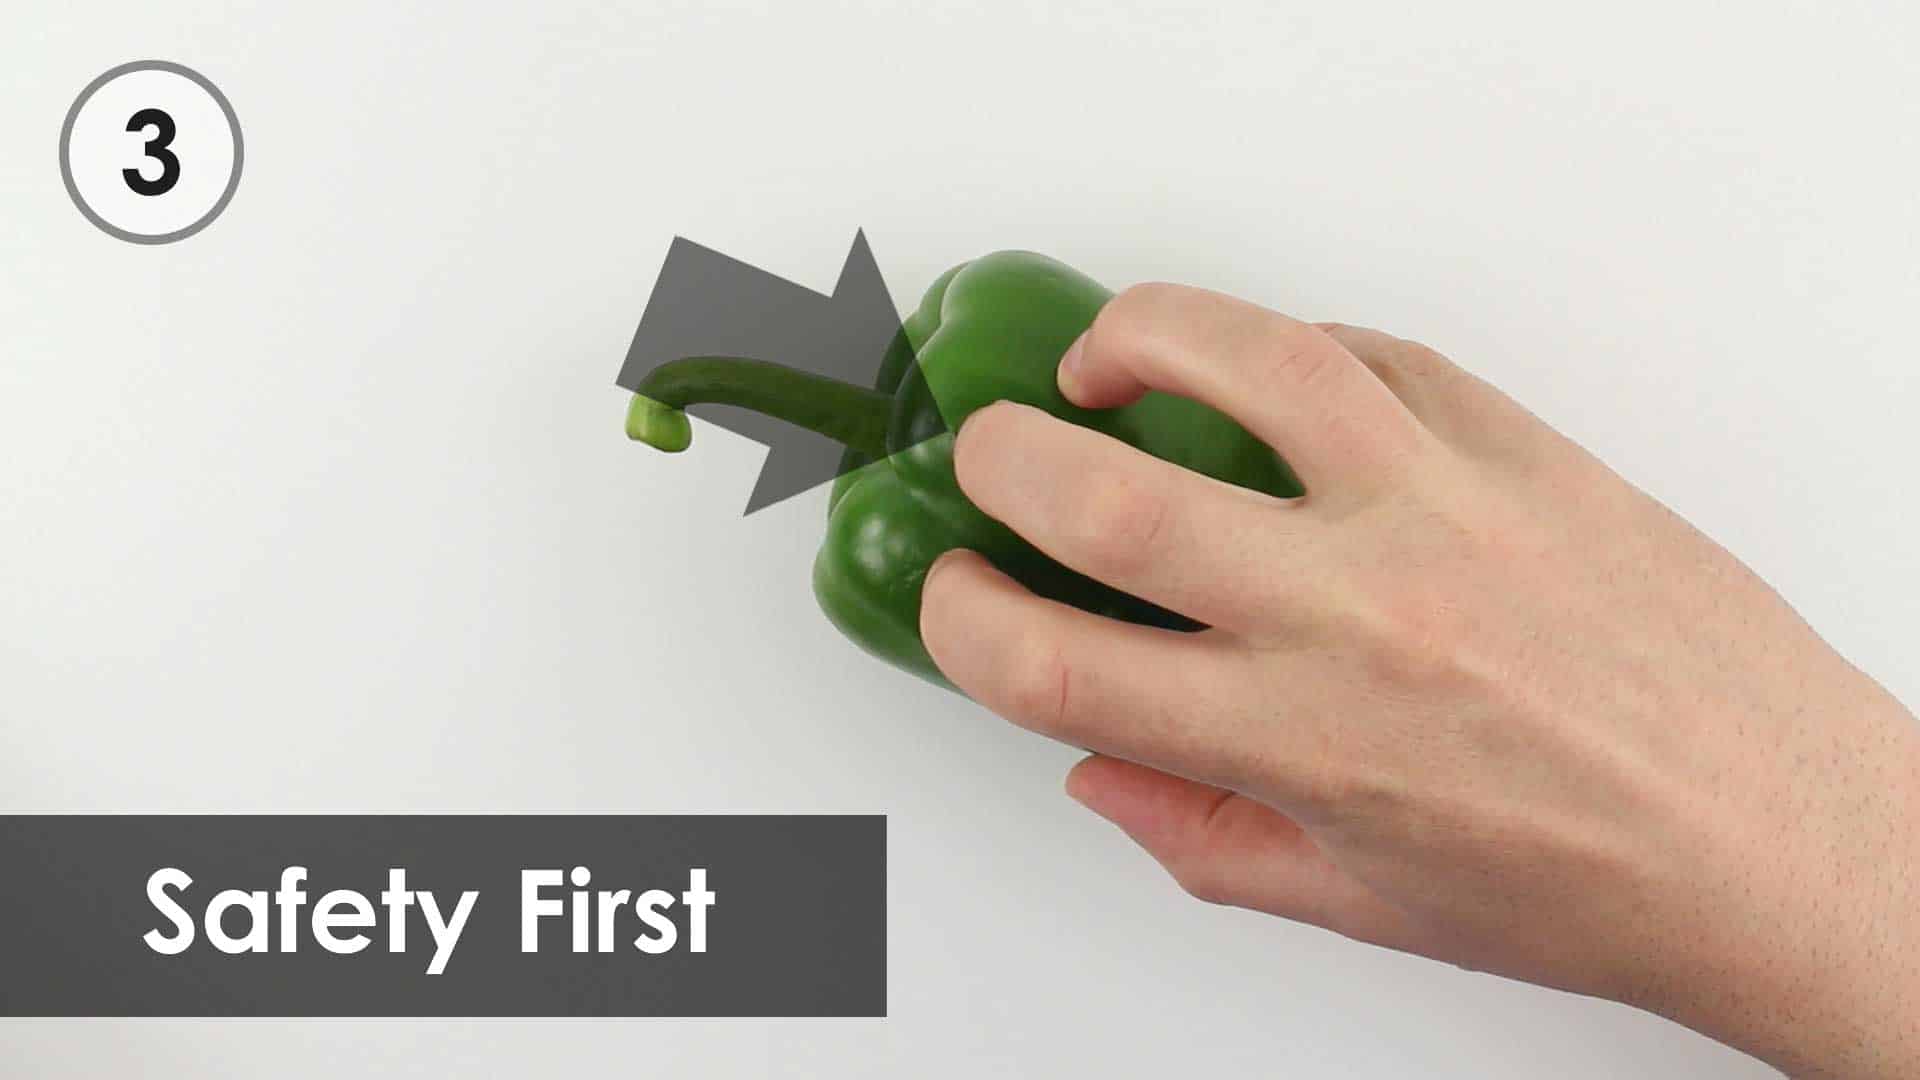 Step 3. Fingers curled back holding bell pepper. Safety First.